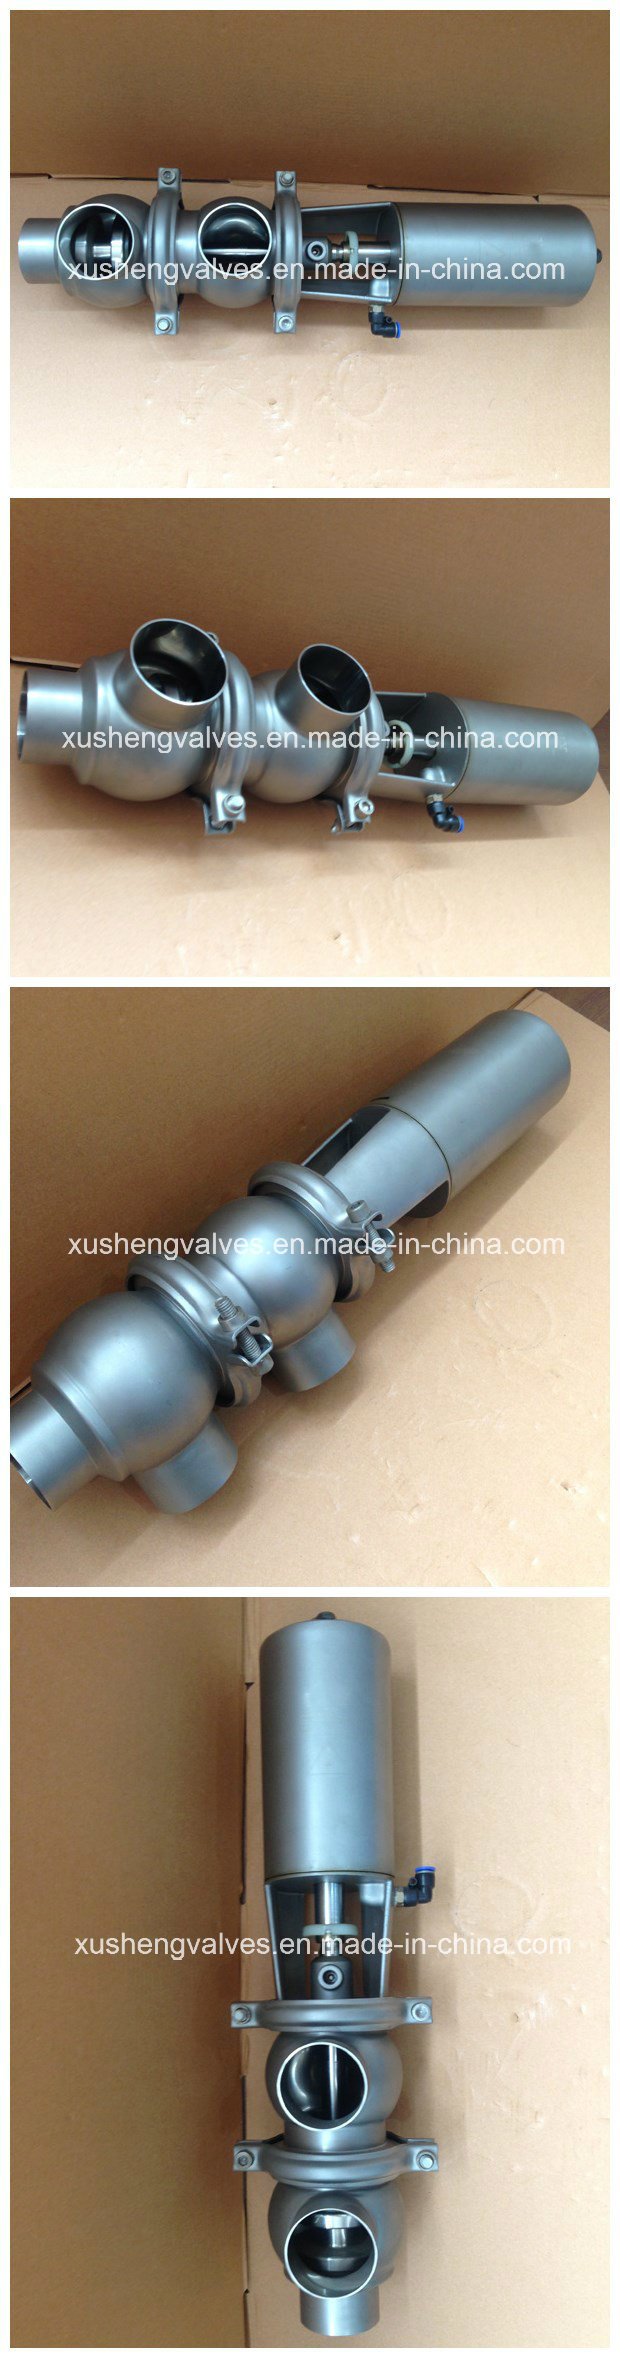 Sanitary Pneumatic Stop and Reversing Valve with Position Sensor